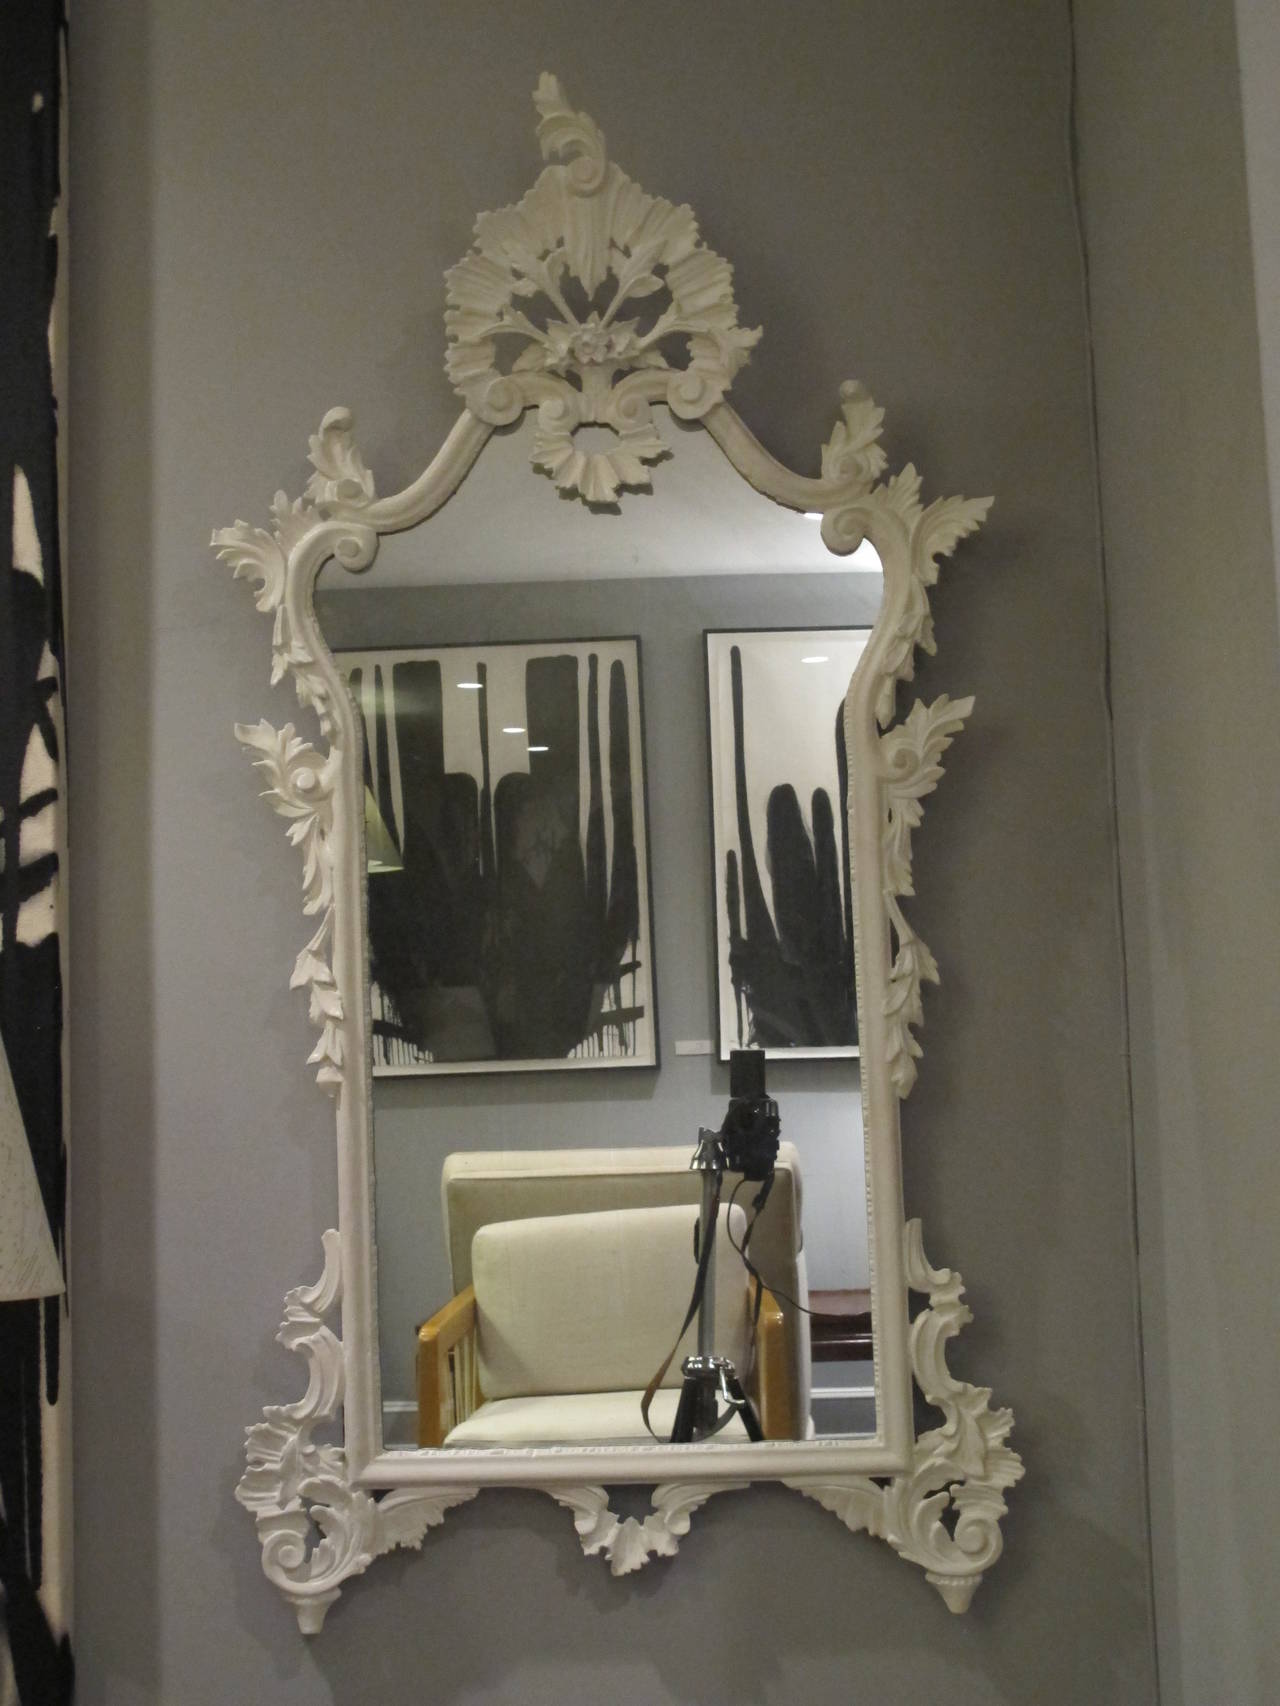 Pale ivory painted over gesso and carved hardwood. Newly repainted. Dimension below are overall, the actual mirror area measures 14.25